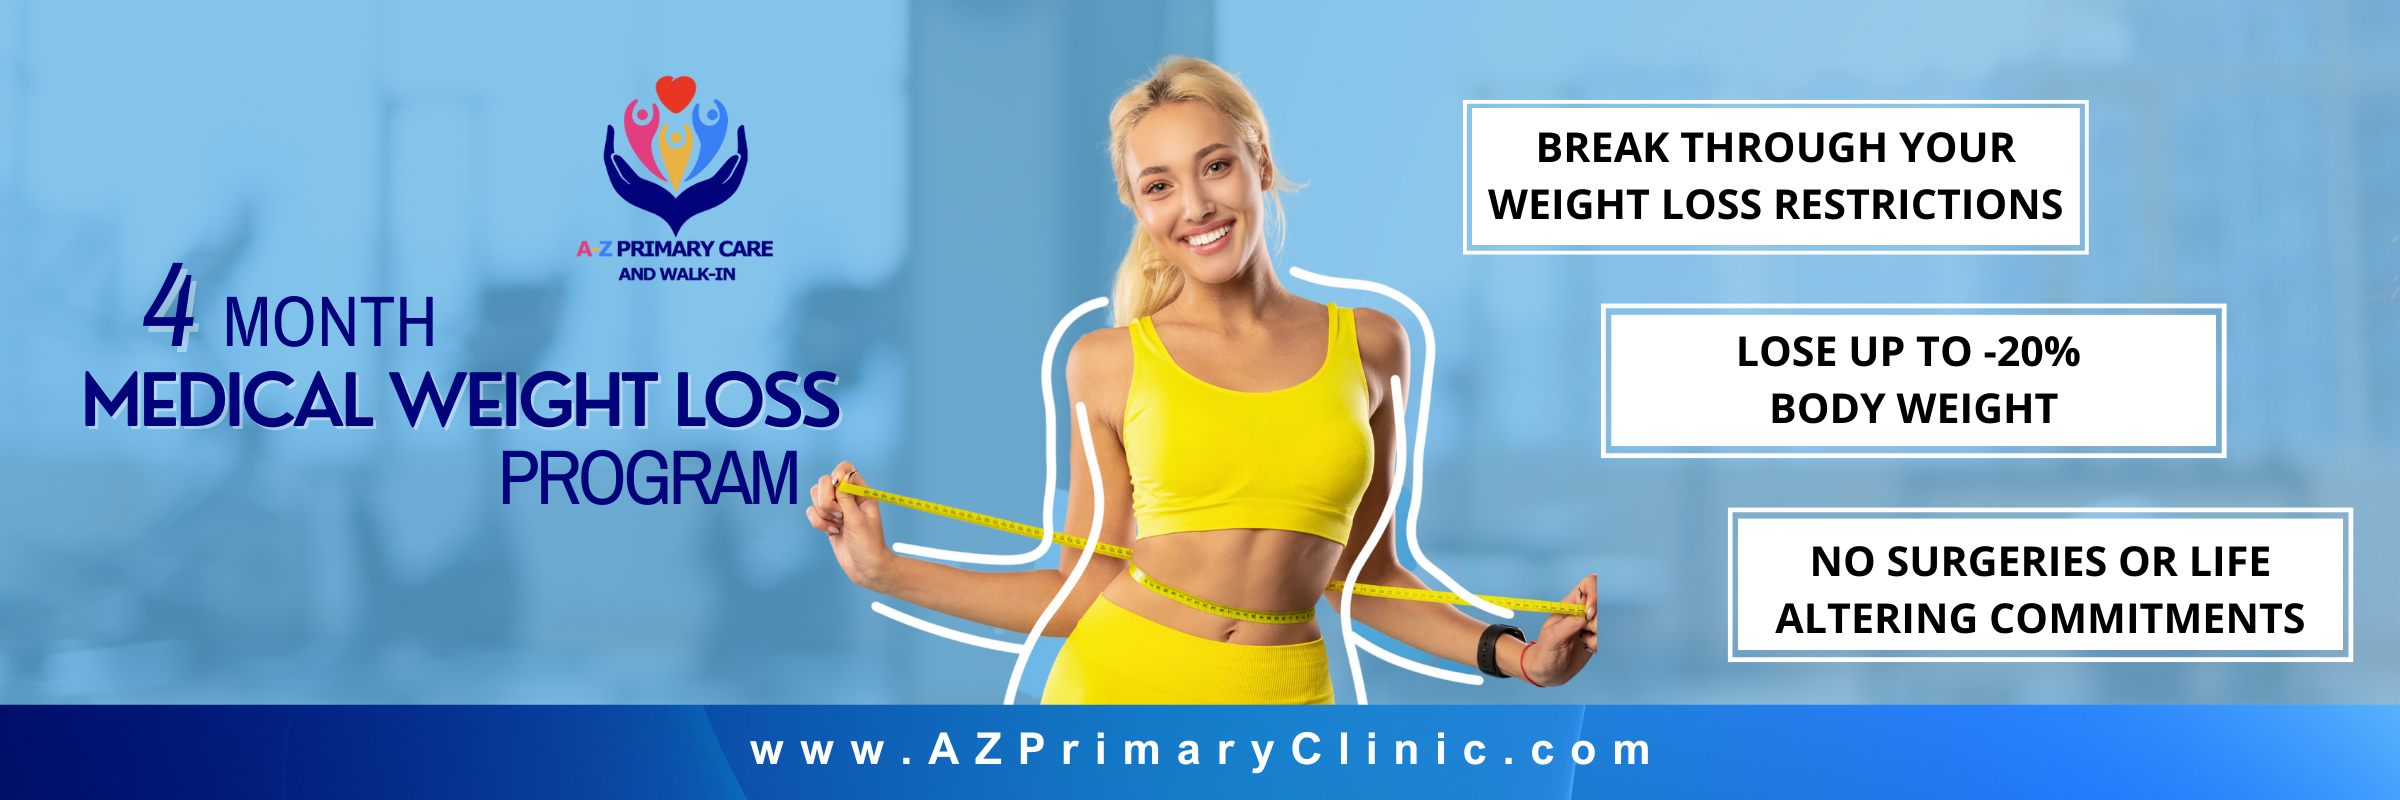 A-Z Primary Care and Walk-In offers a 4 month medical weight loss program